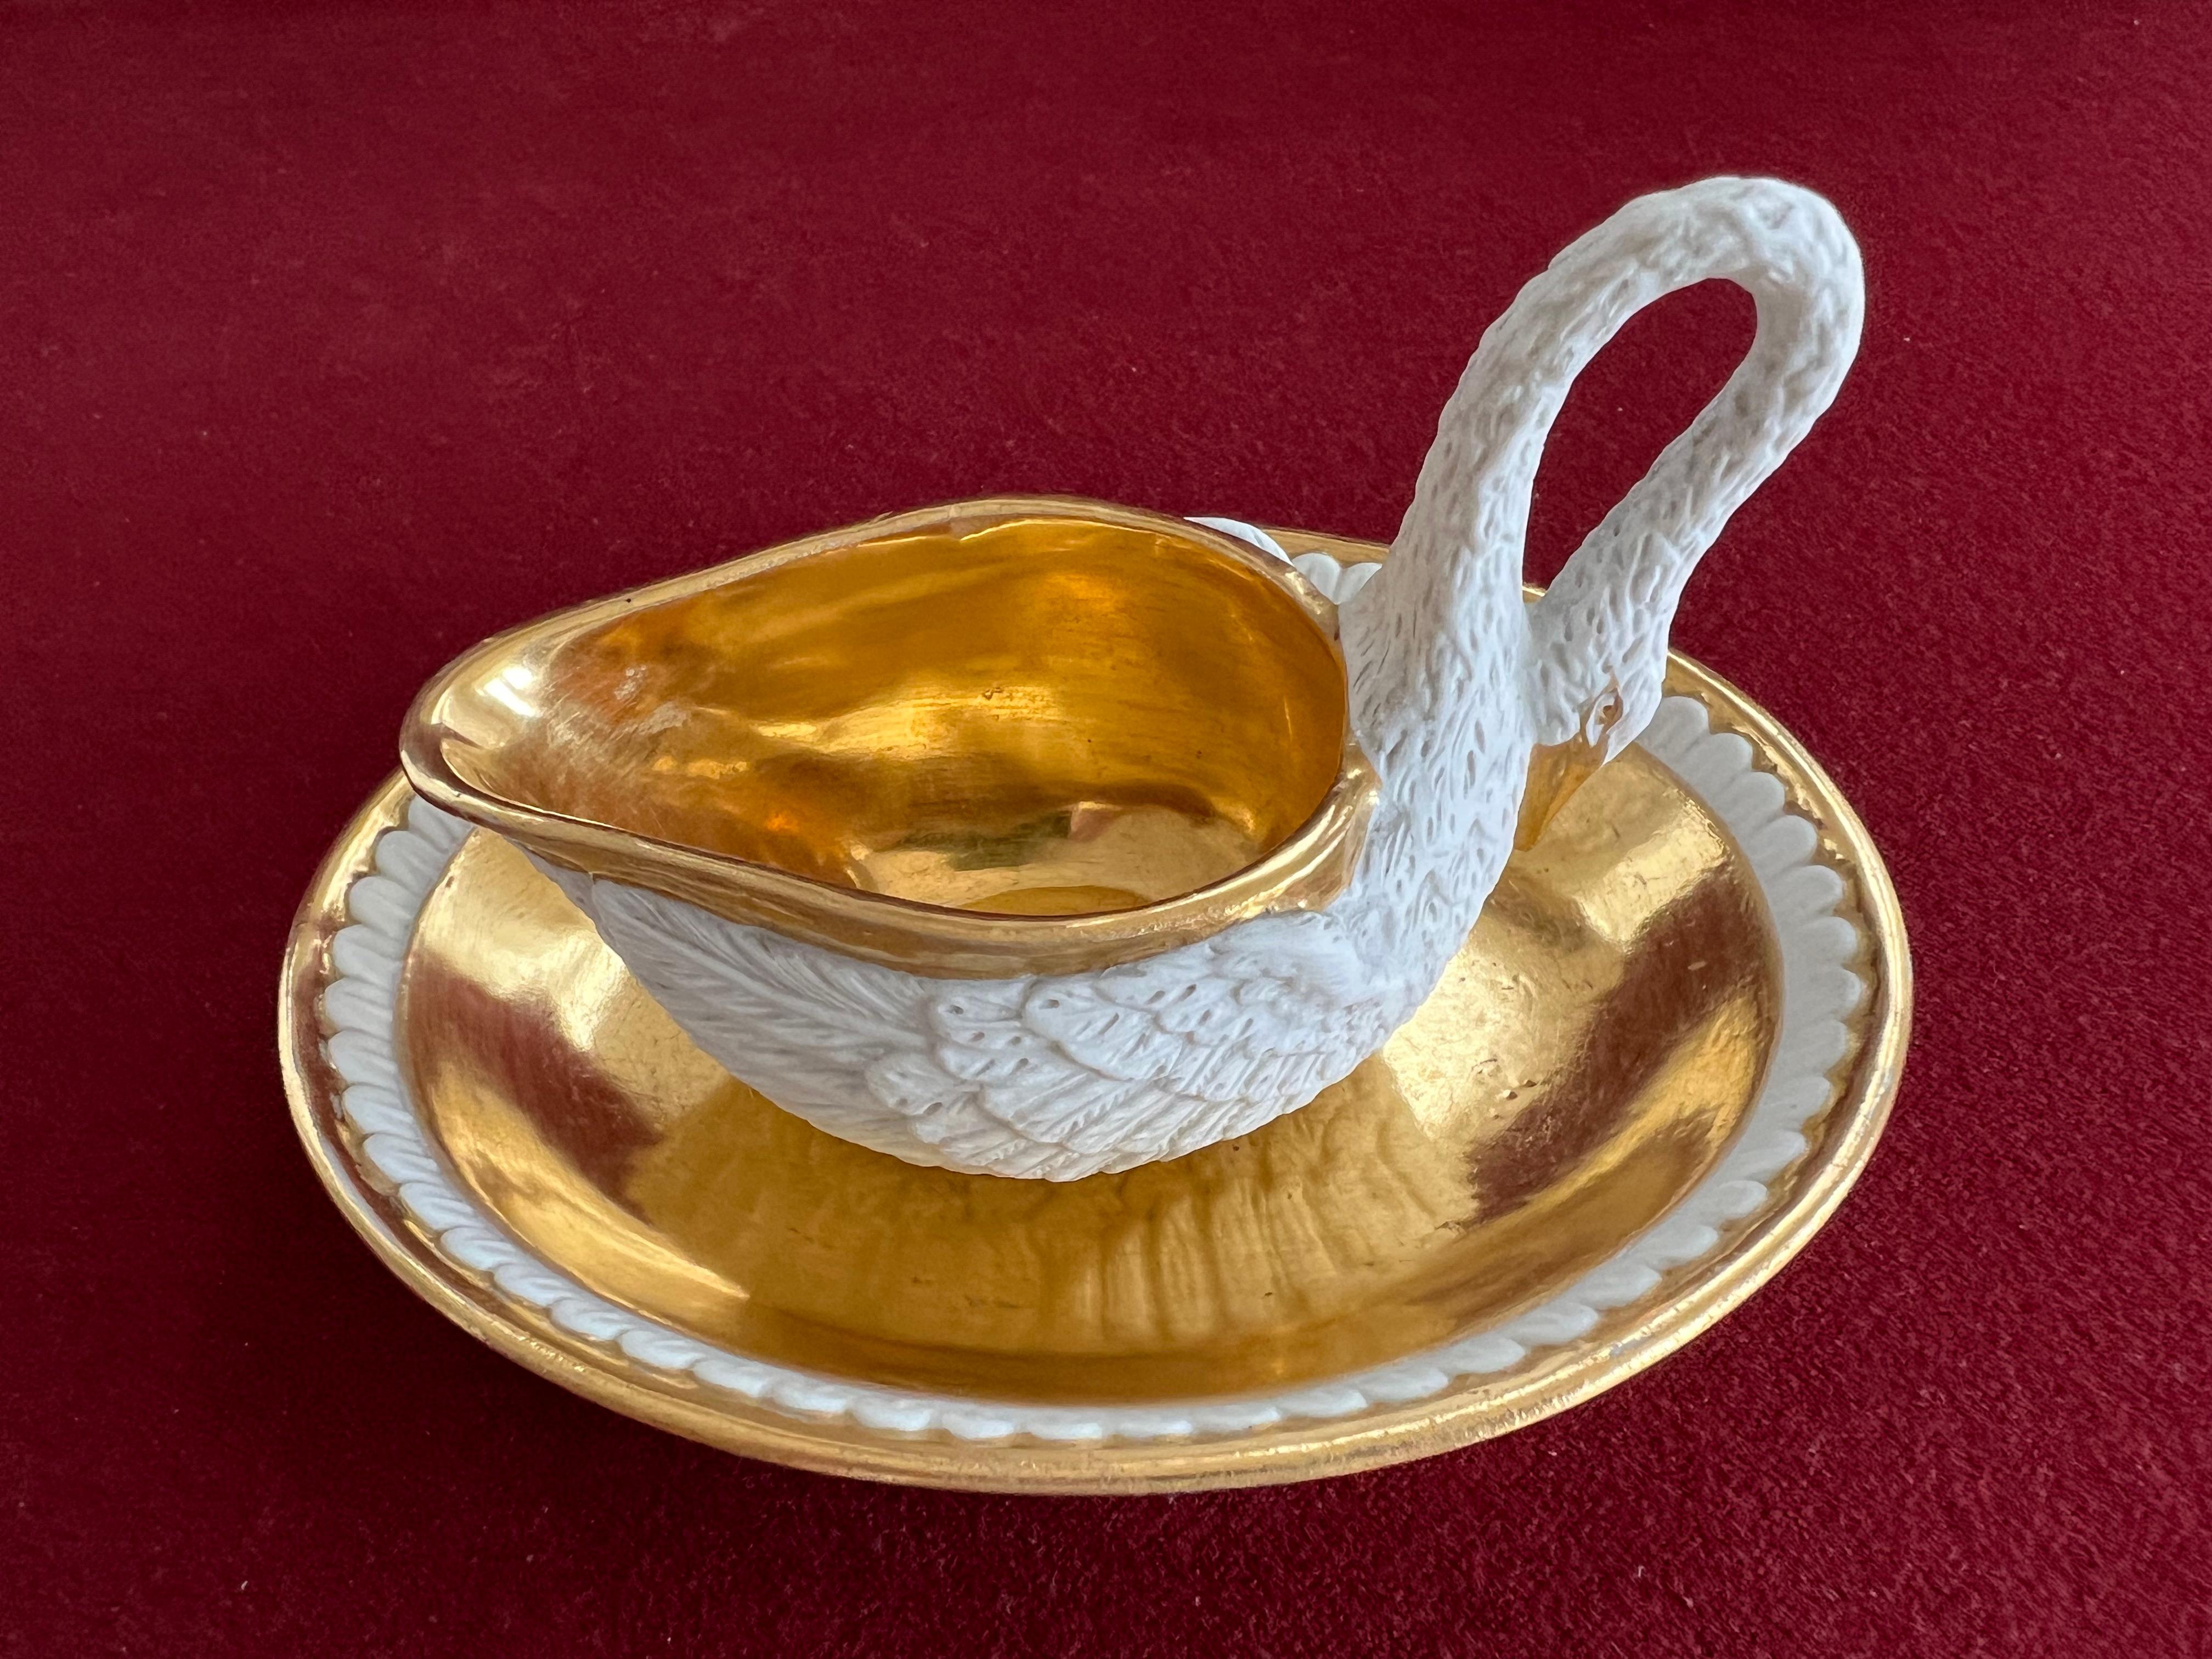 A very fine Sevres cup and saucer modelled as a naturalistic swan in biscuit porcelain and finely gilded. In excellent condition only showing very minor surface scratches on gilding inside the cup. No damage or restoration. Marked in Red Stencil 